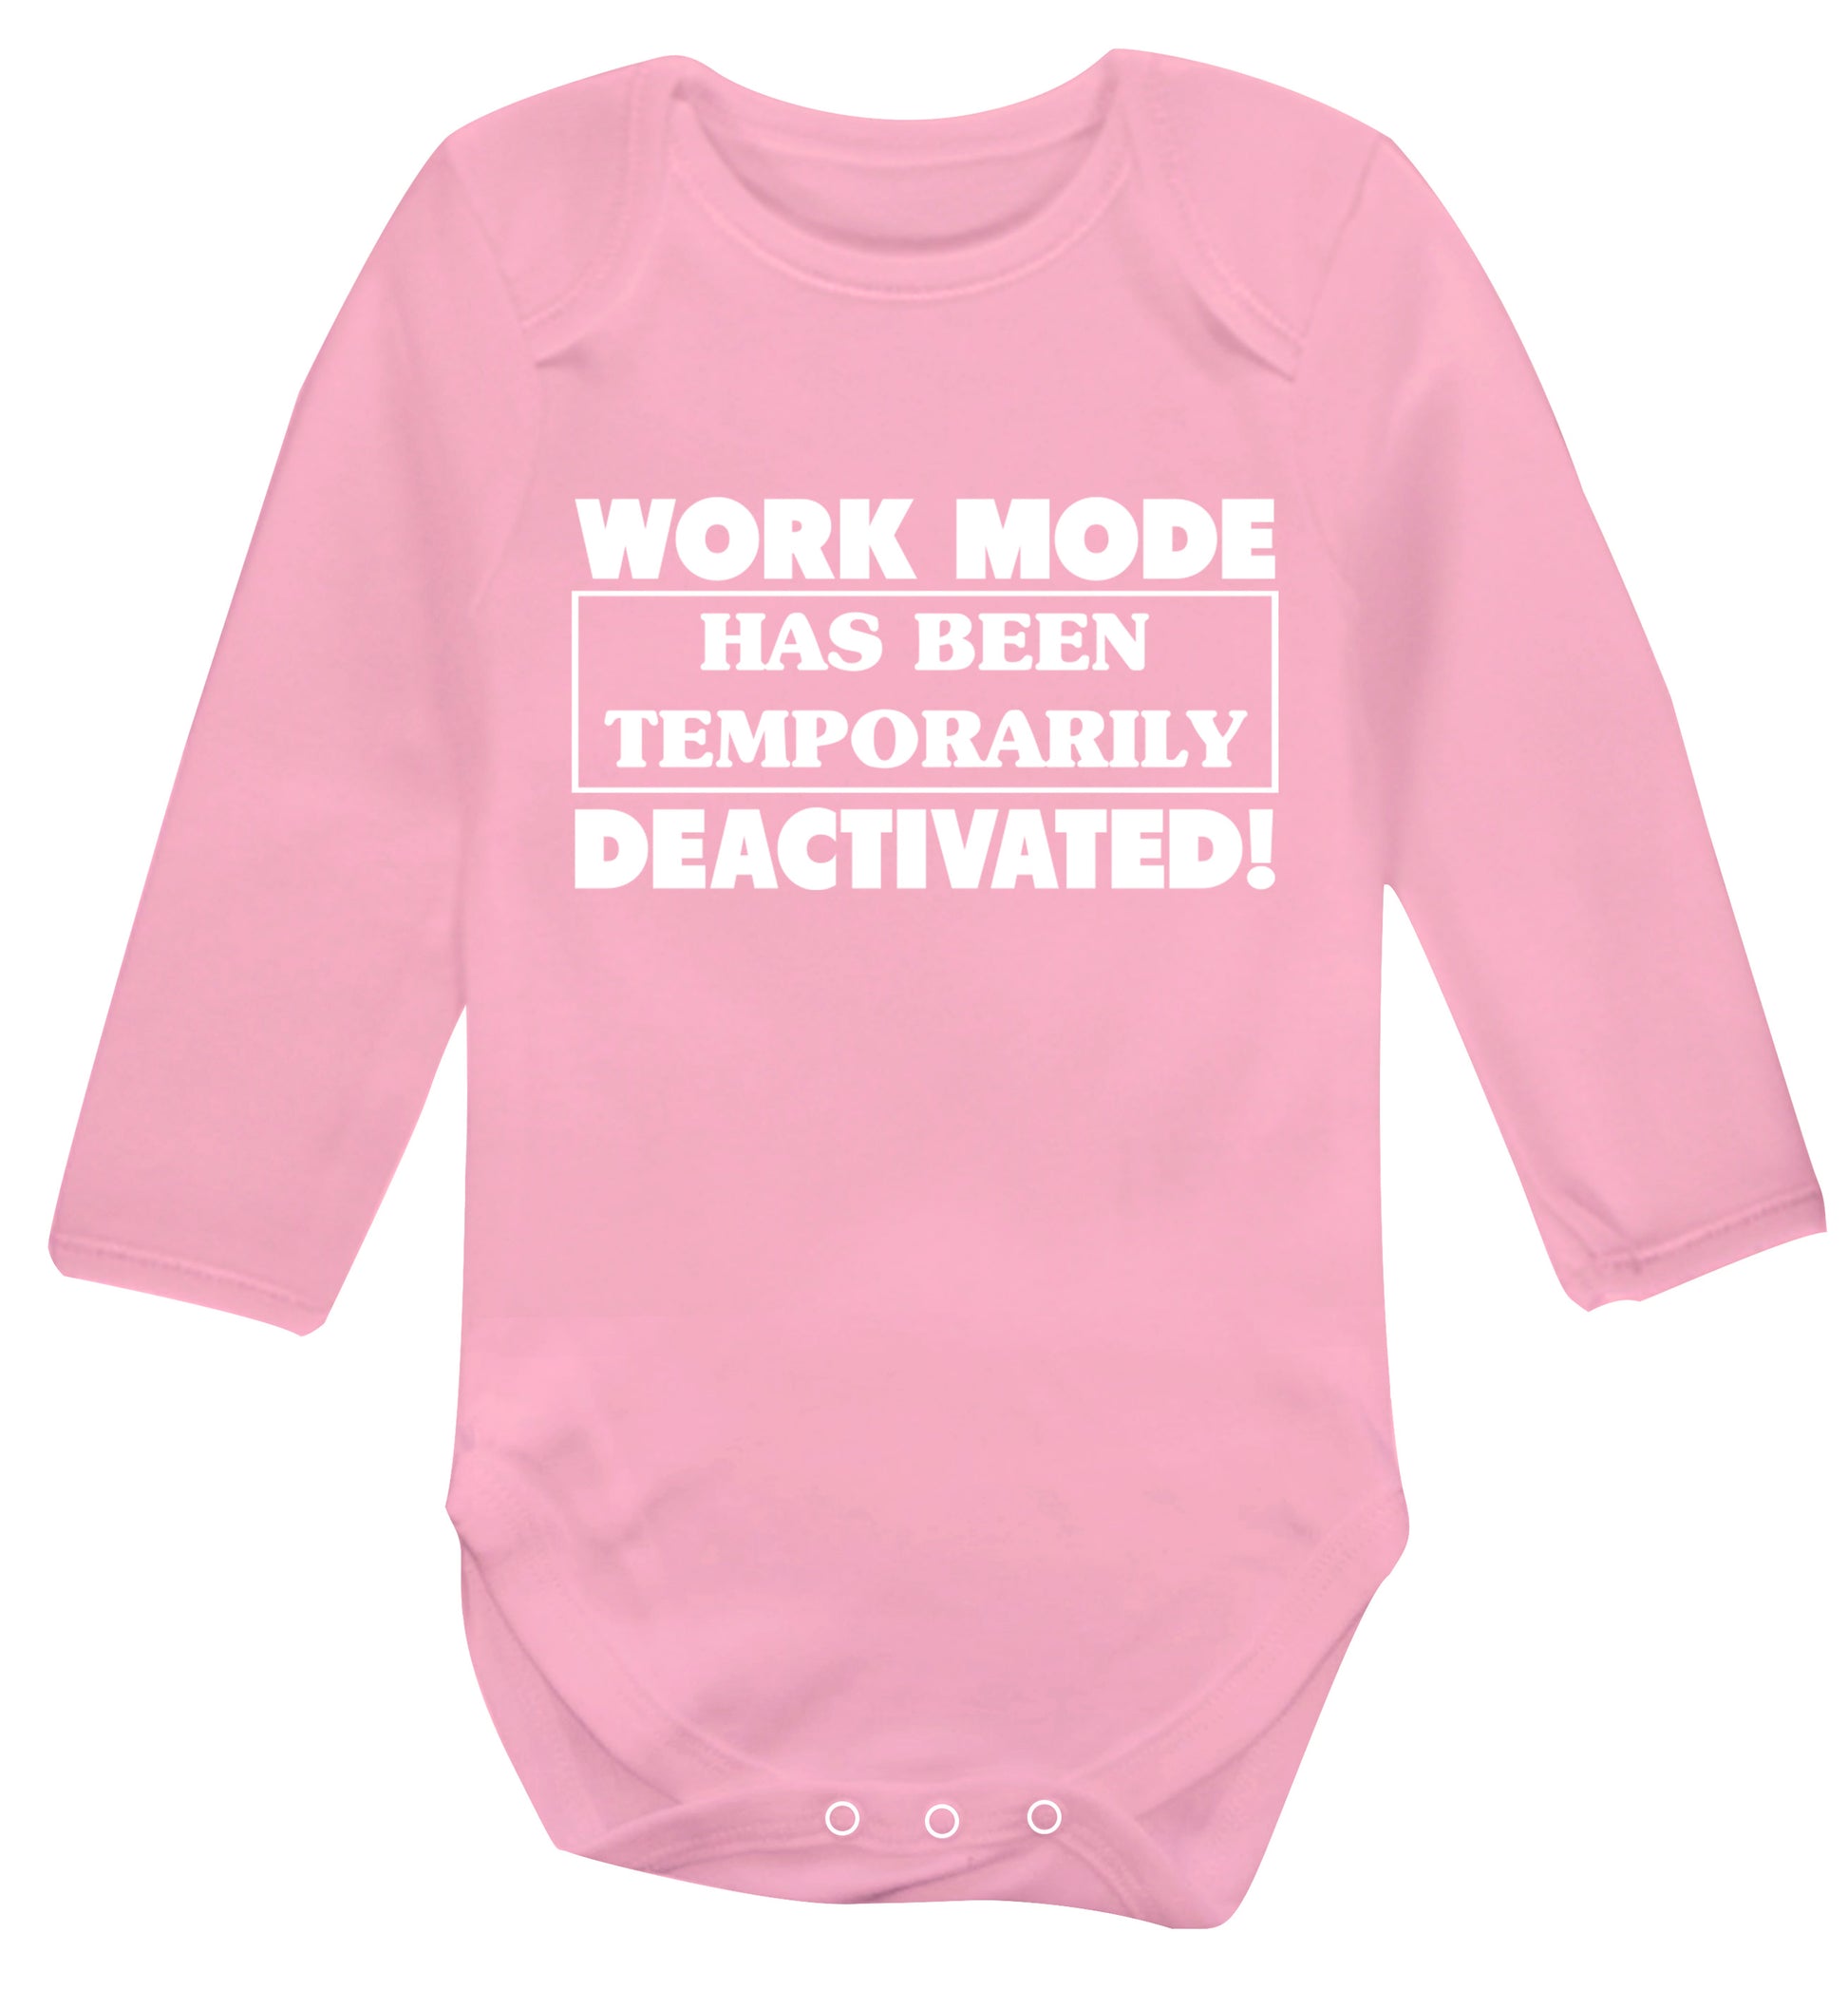 Work mode has now been temporarily deactivated Baby Vest long sleeved pale pink 6-12 months